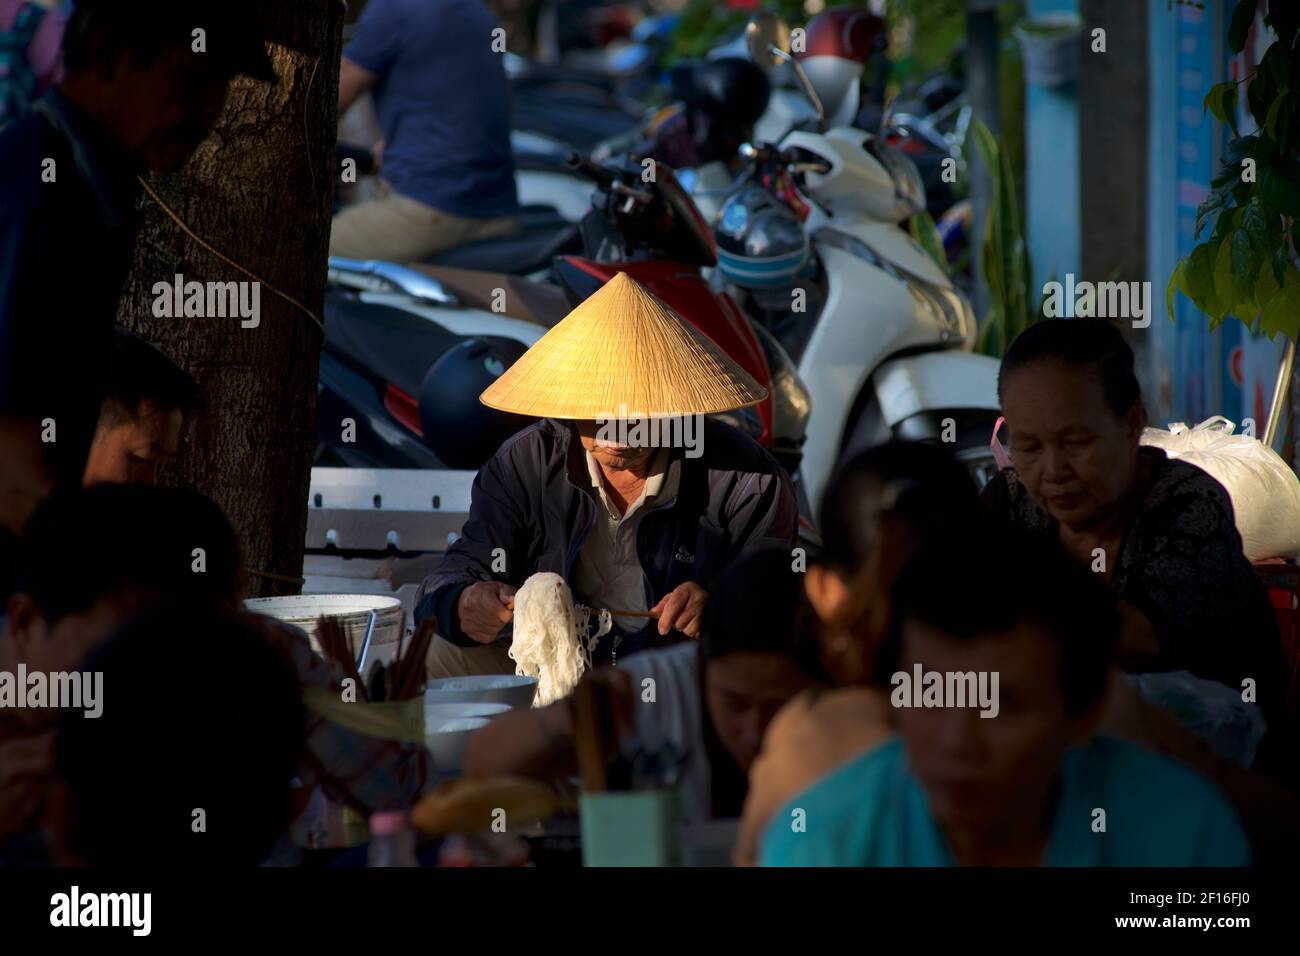 Vietnamese man in distinctive Vietnamese conical hat eating noodles at a roadside eatery, Hanoi, Vietnam. Stock Photo